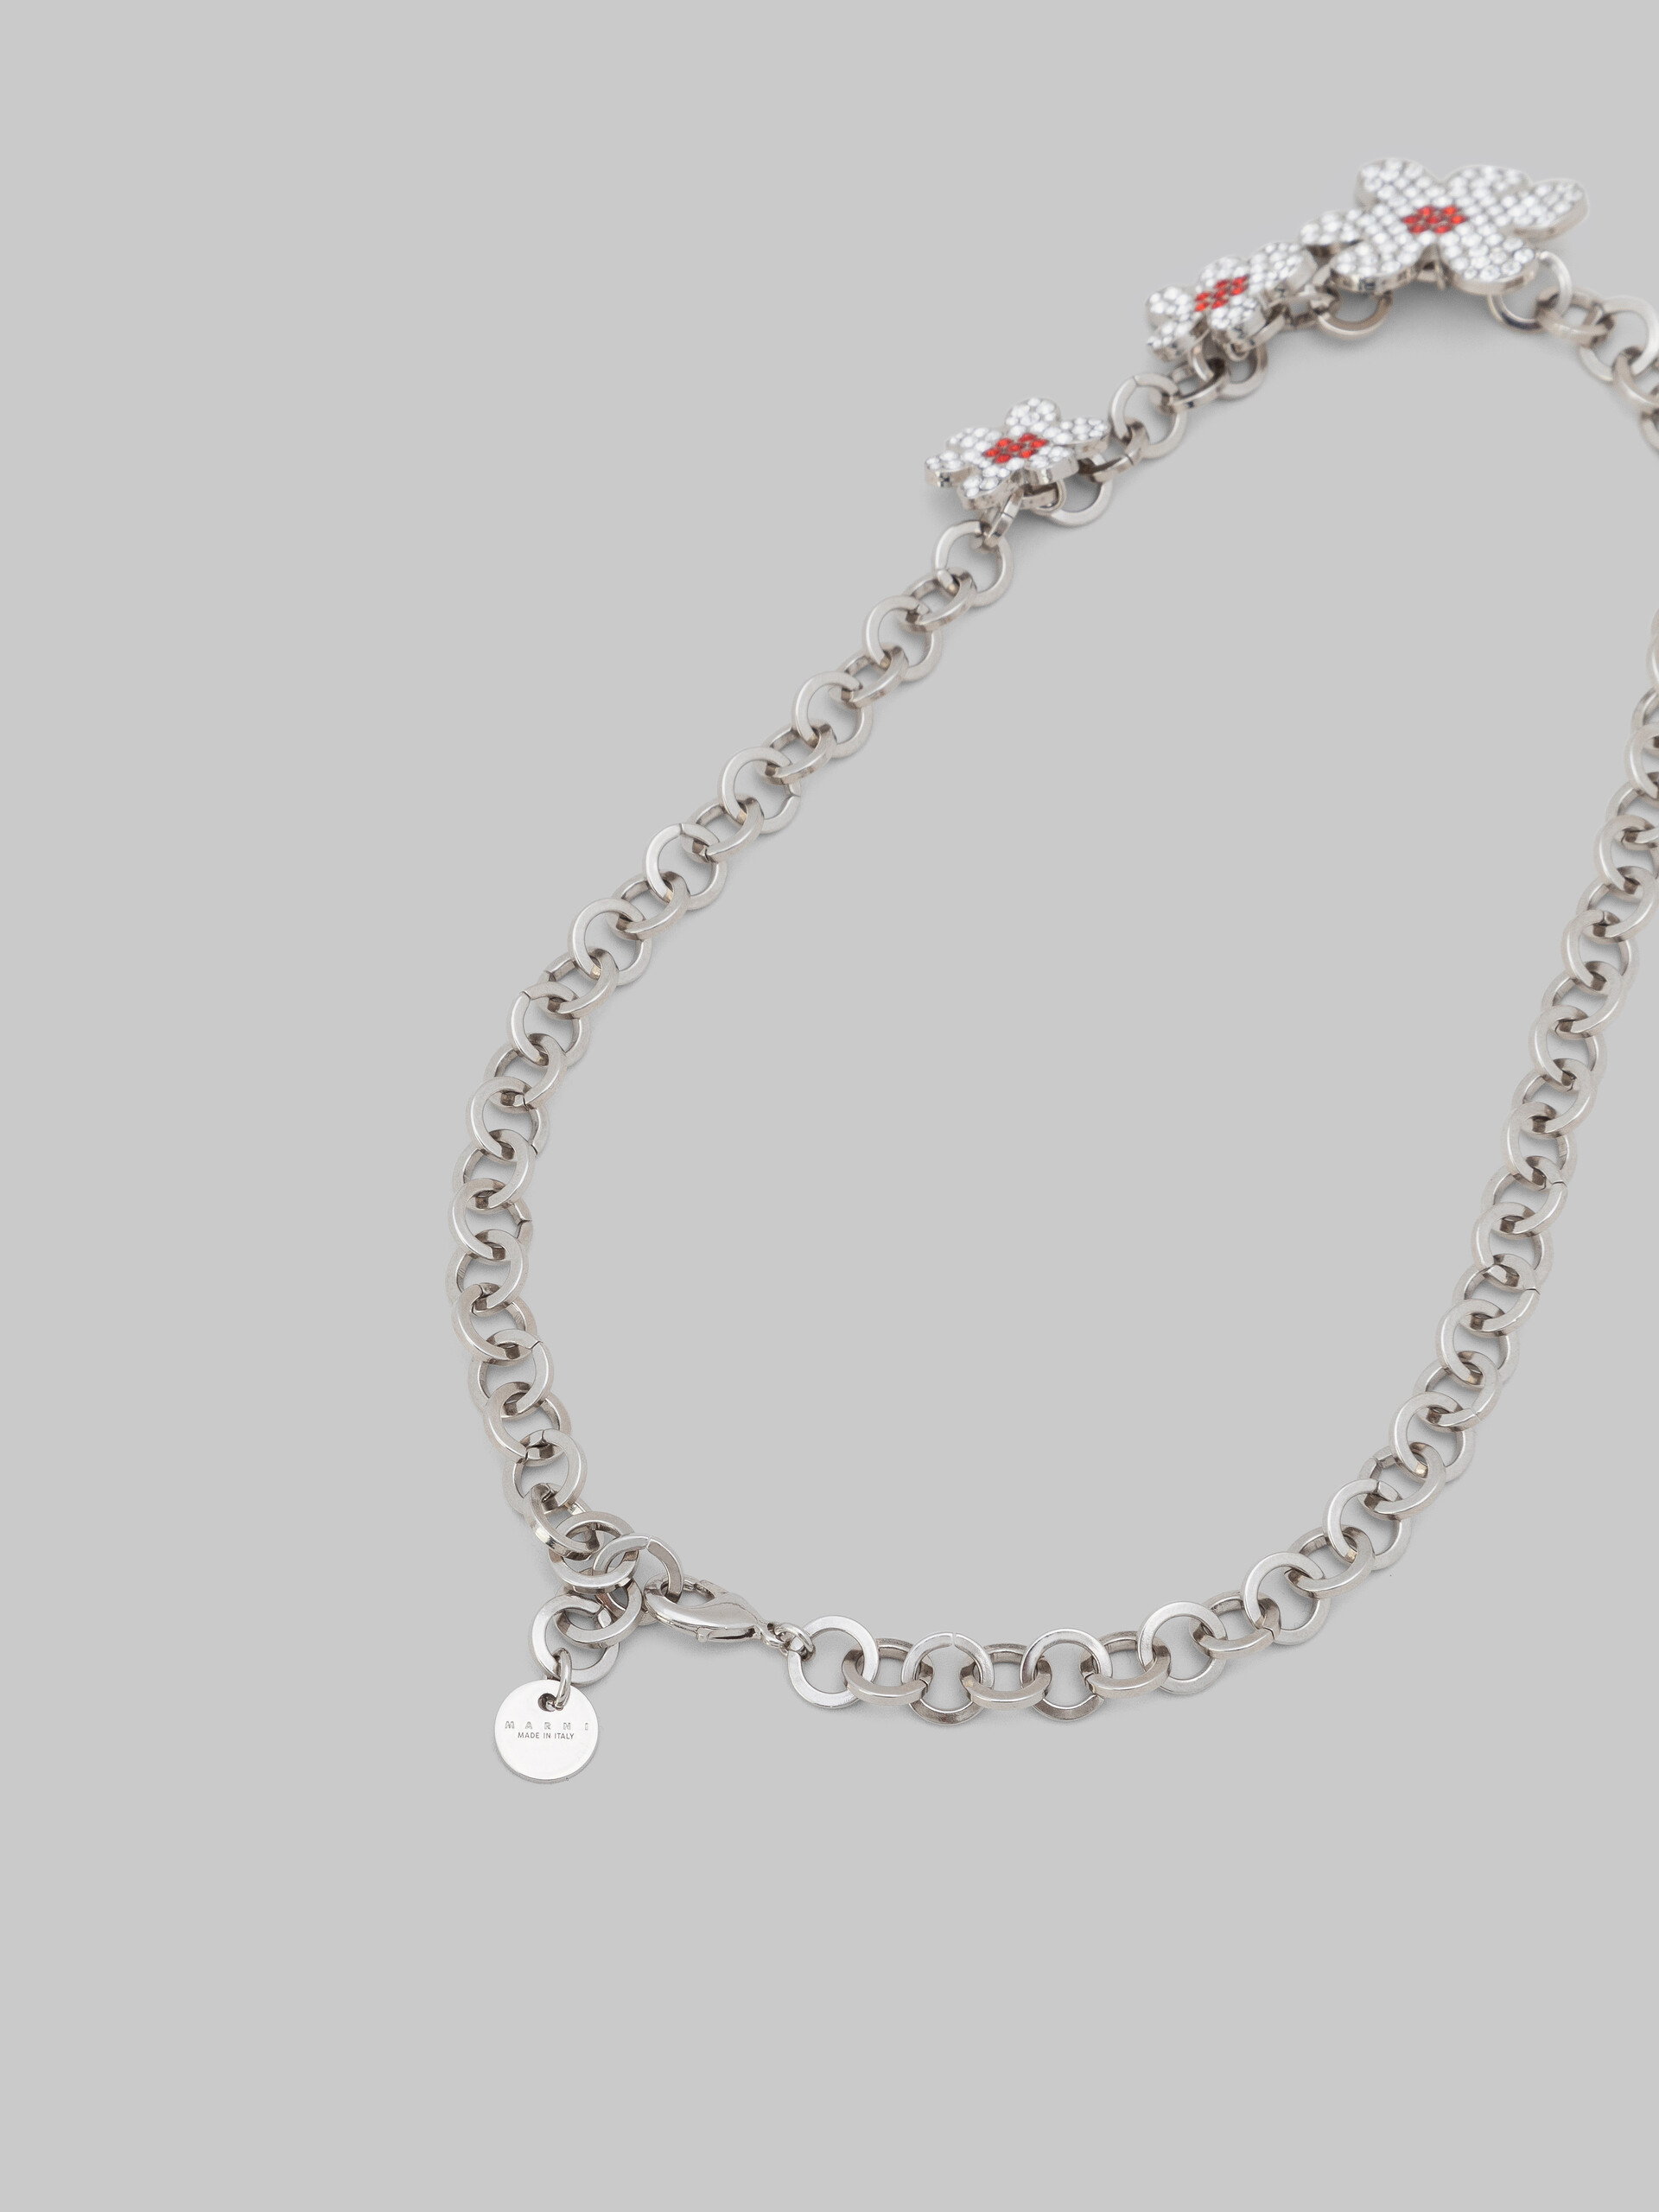 Palladium round link chain necklace with daisy charms - Necklaces - Image 4